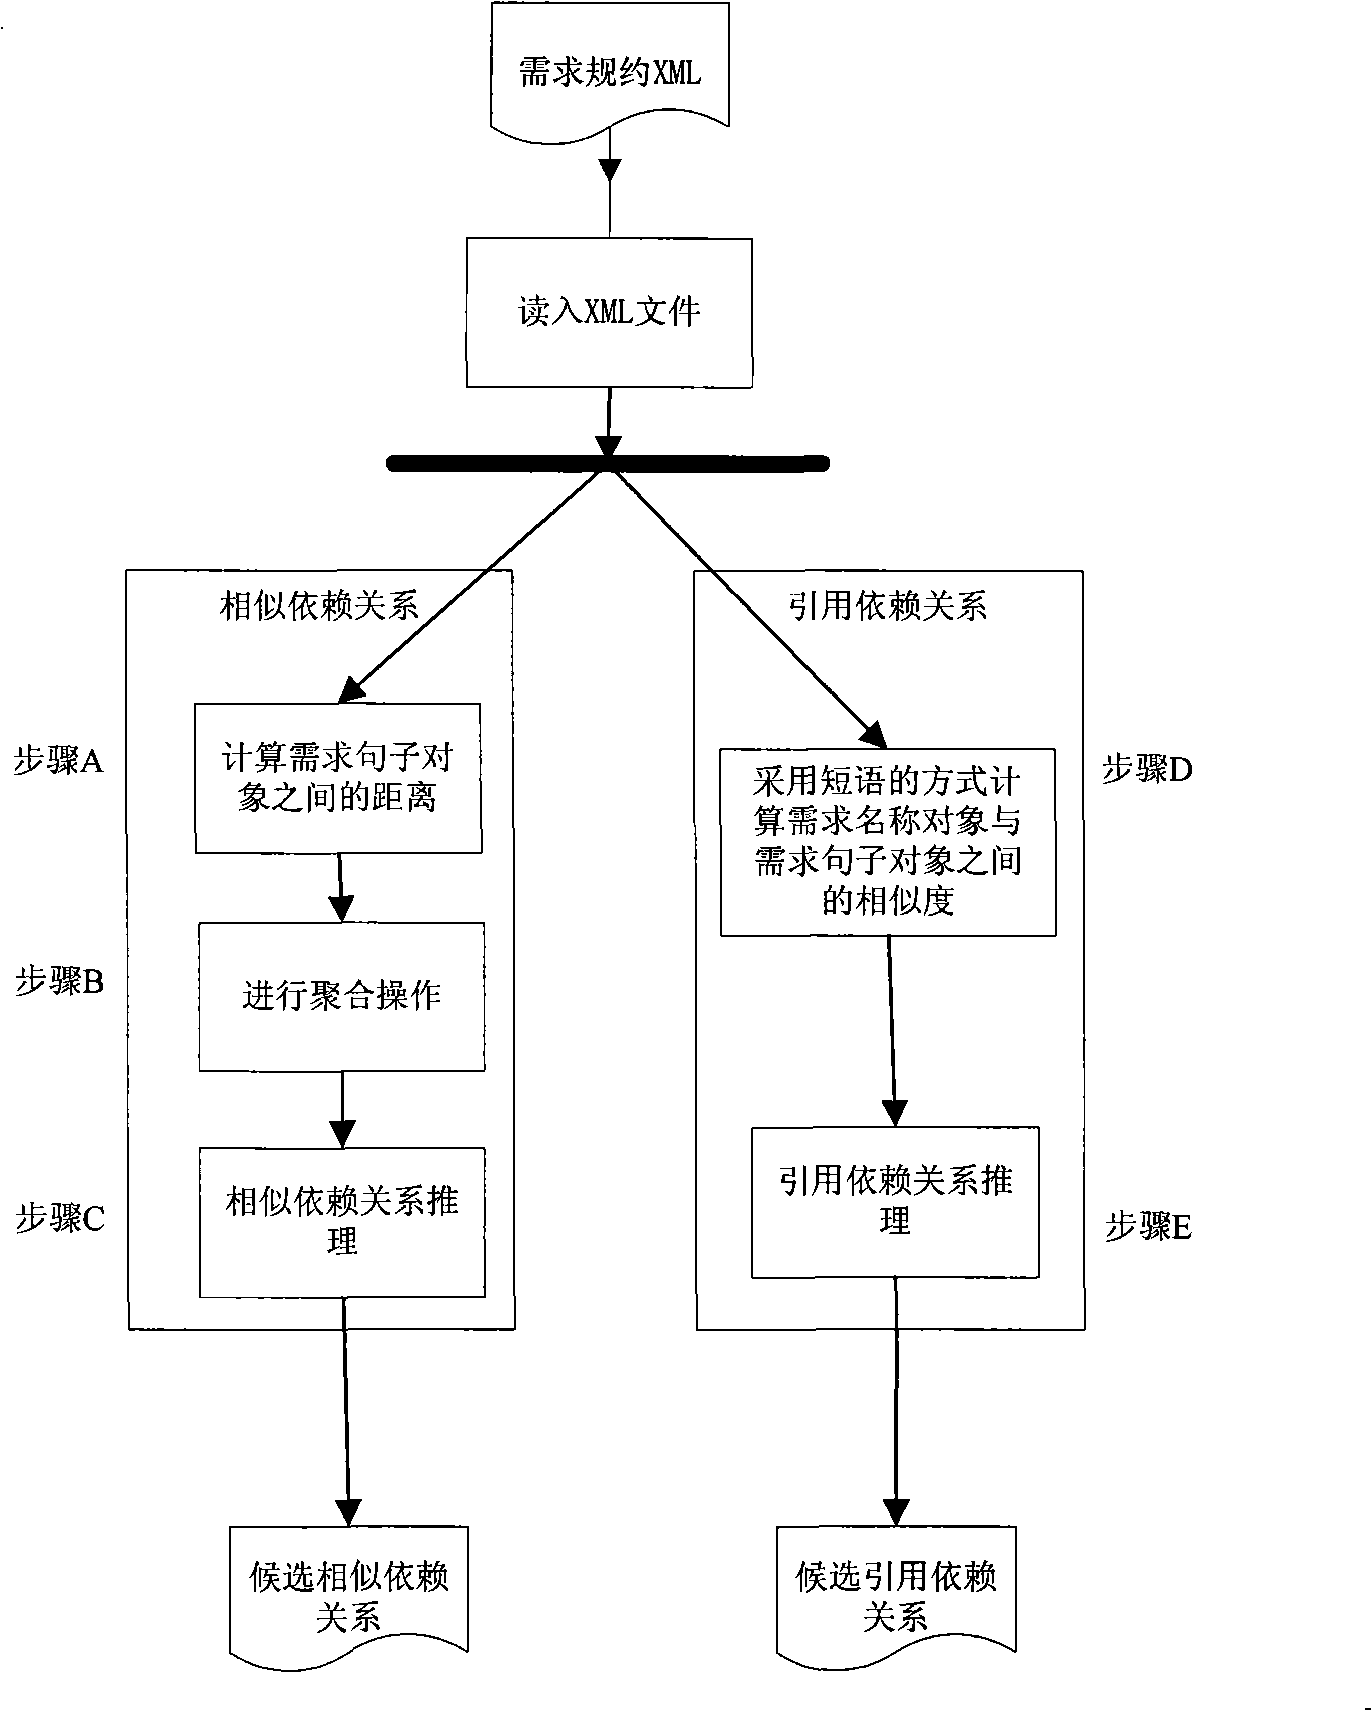 Method for automatic recognition for dependency relationship of demand